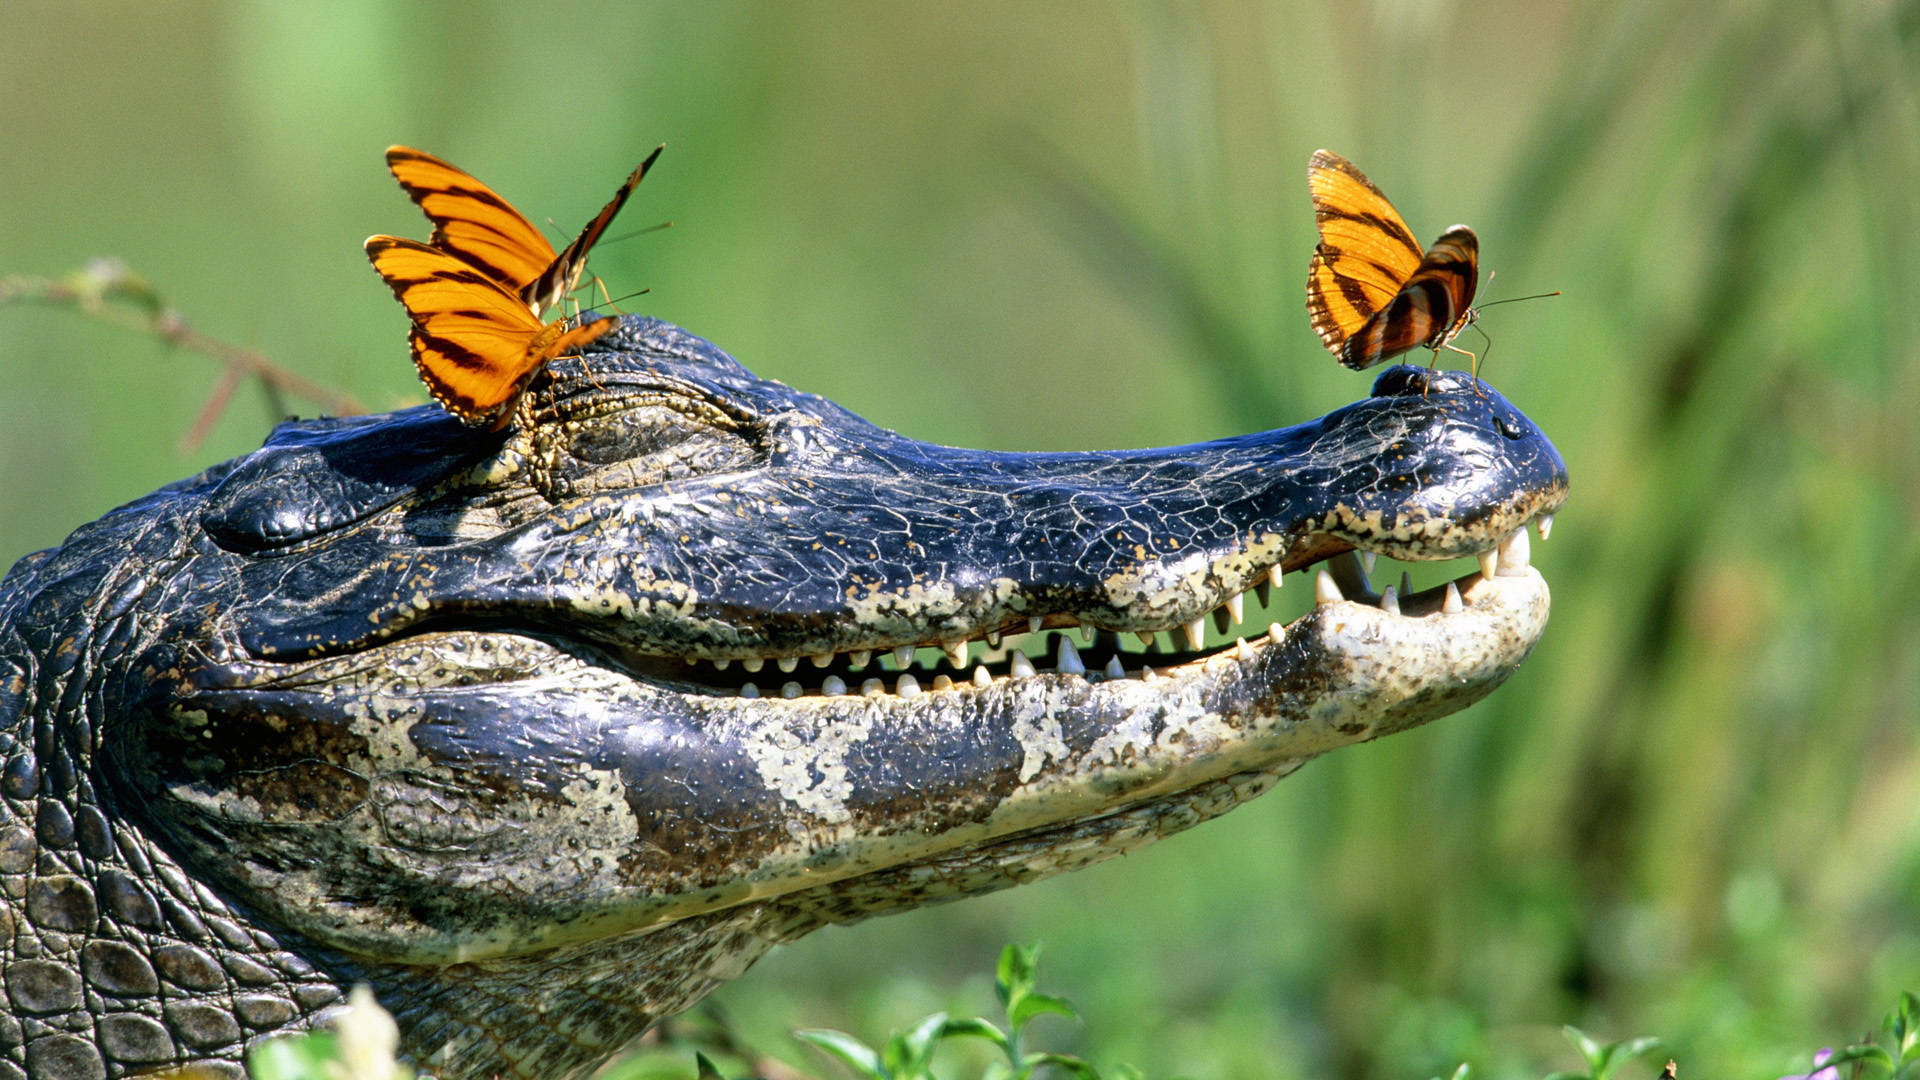 Cute Alligator With Butterflies Background